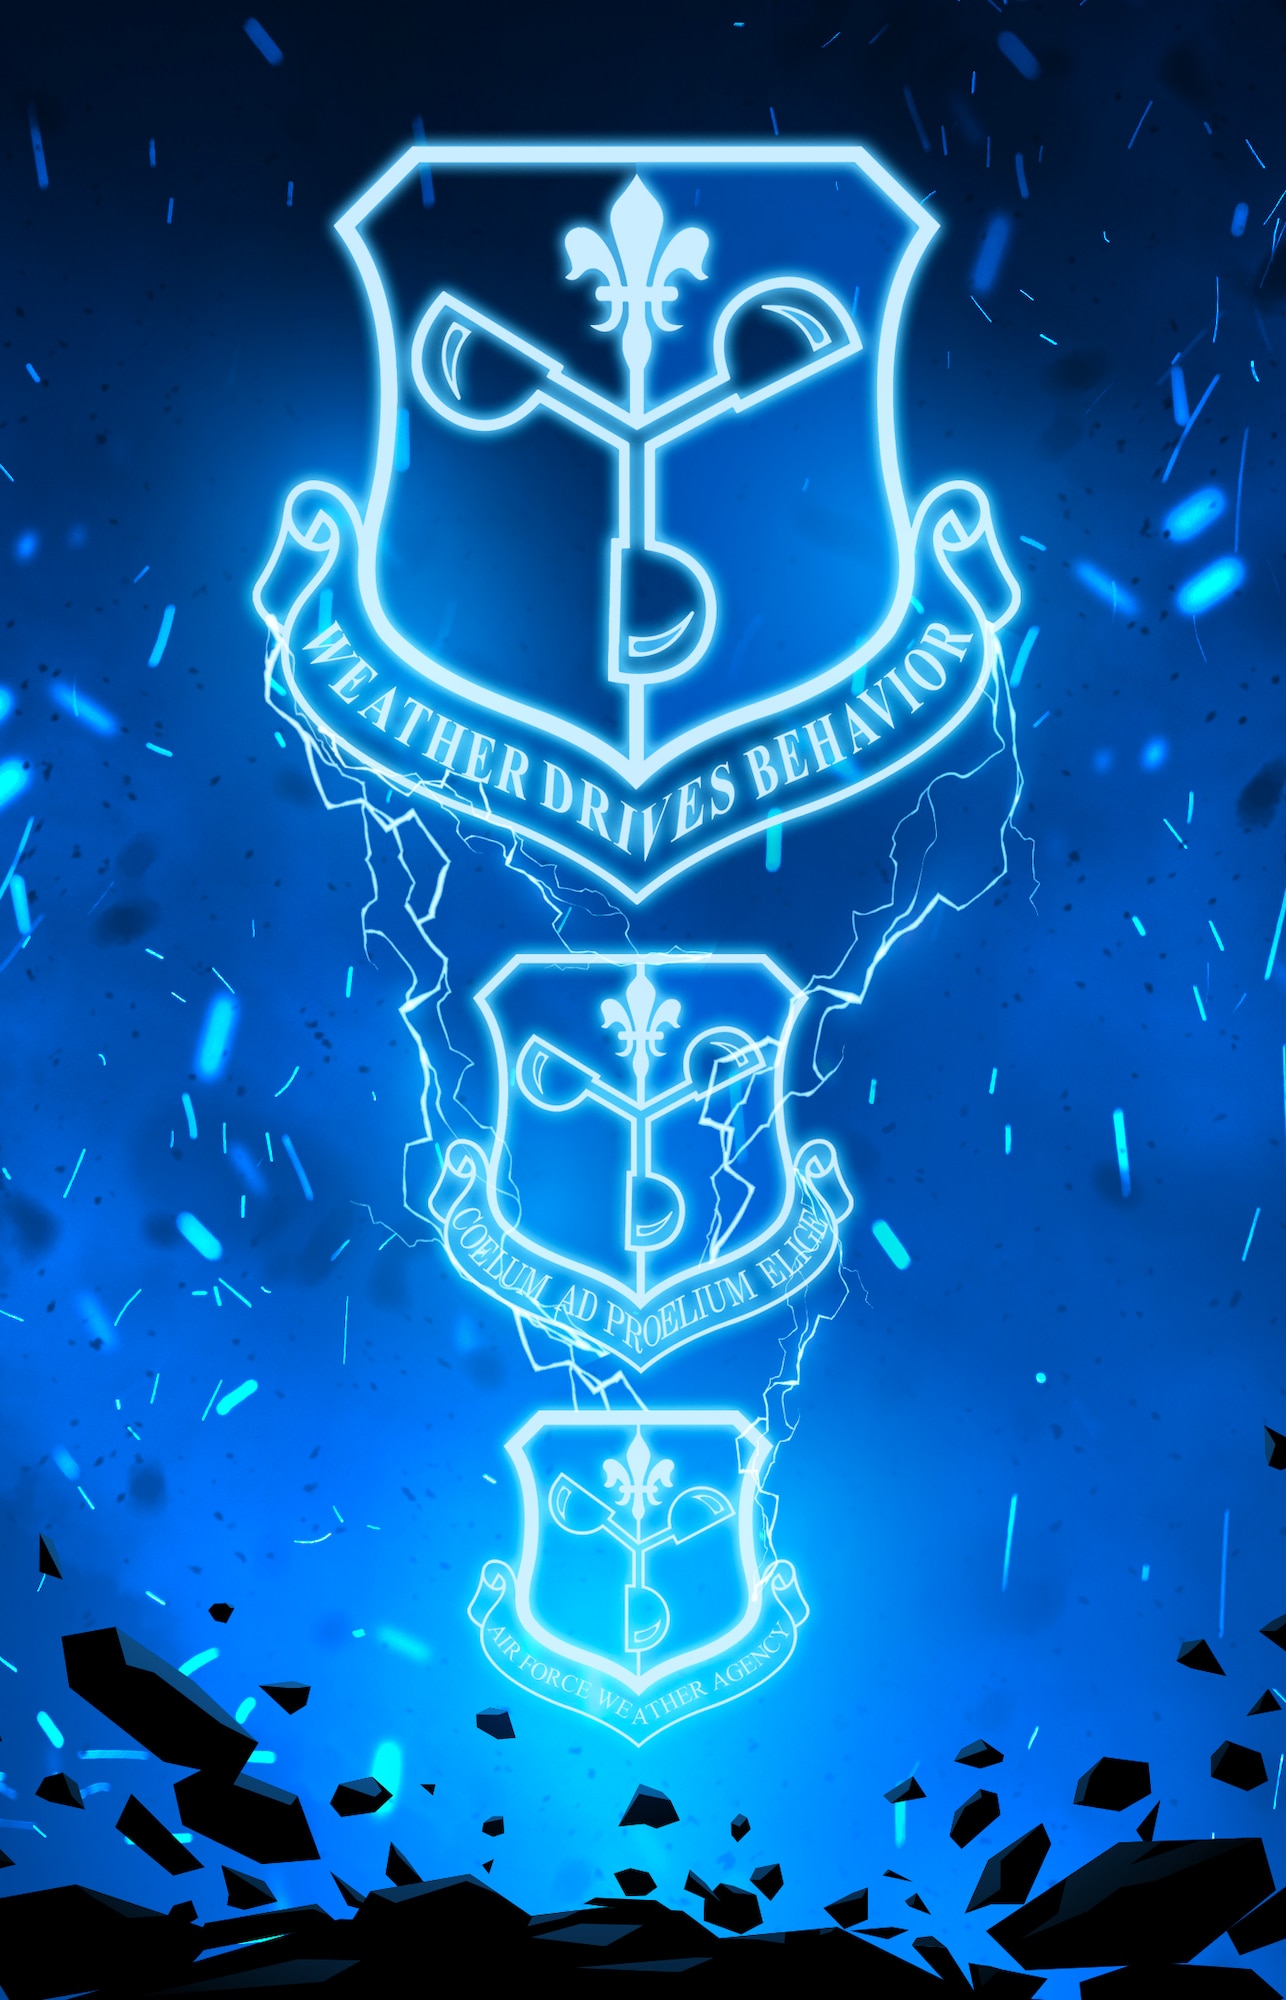 A blue background with shields morphing into the current shield.